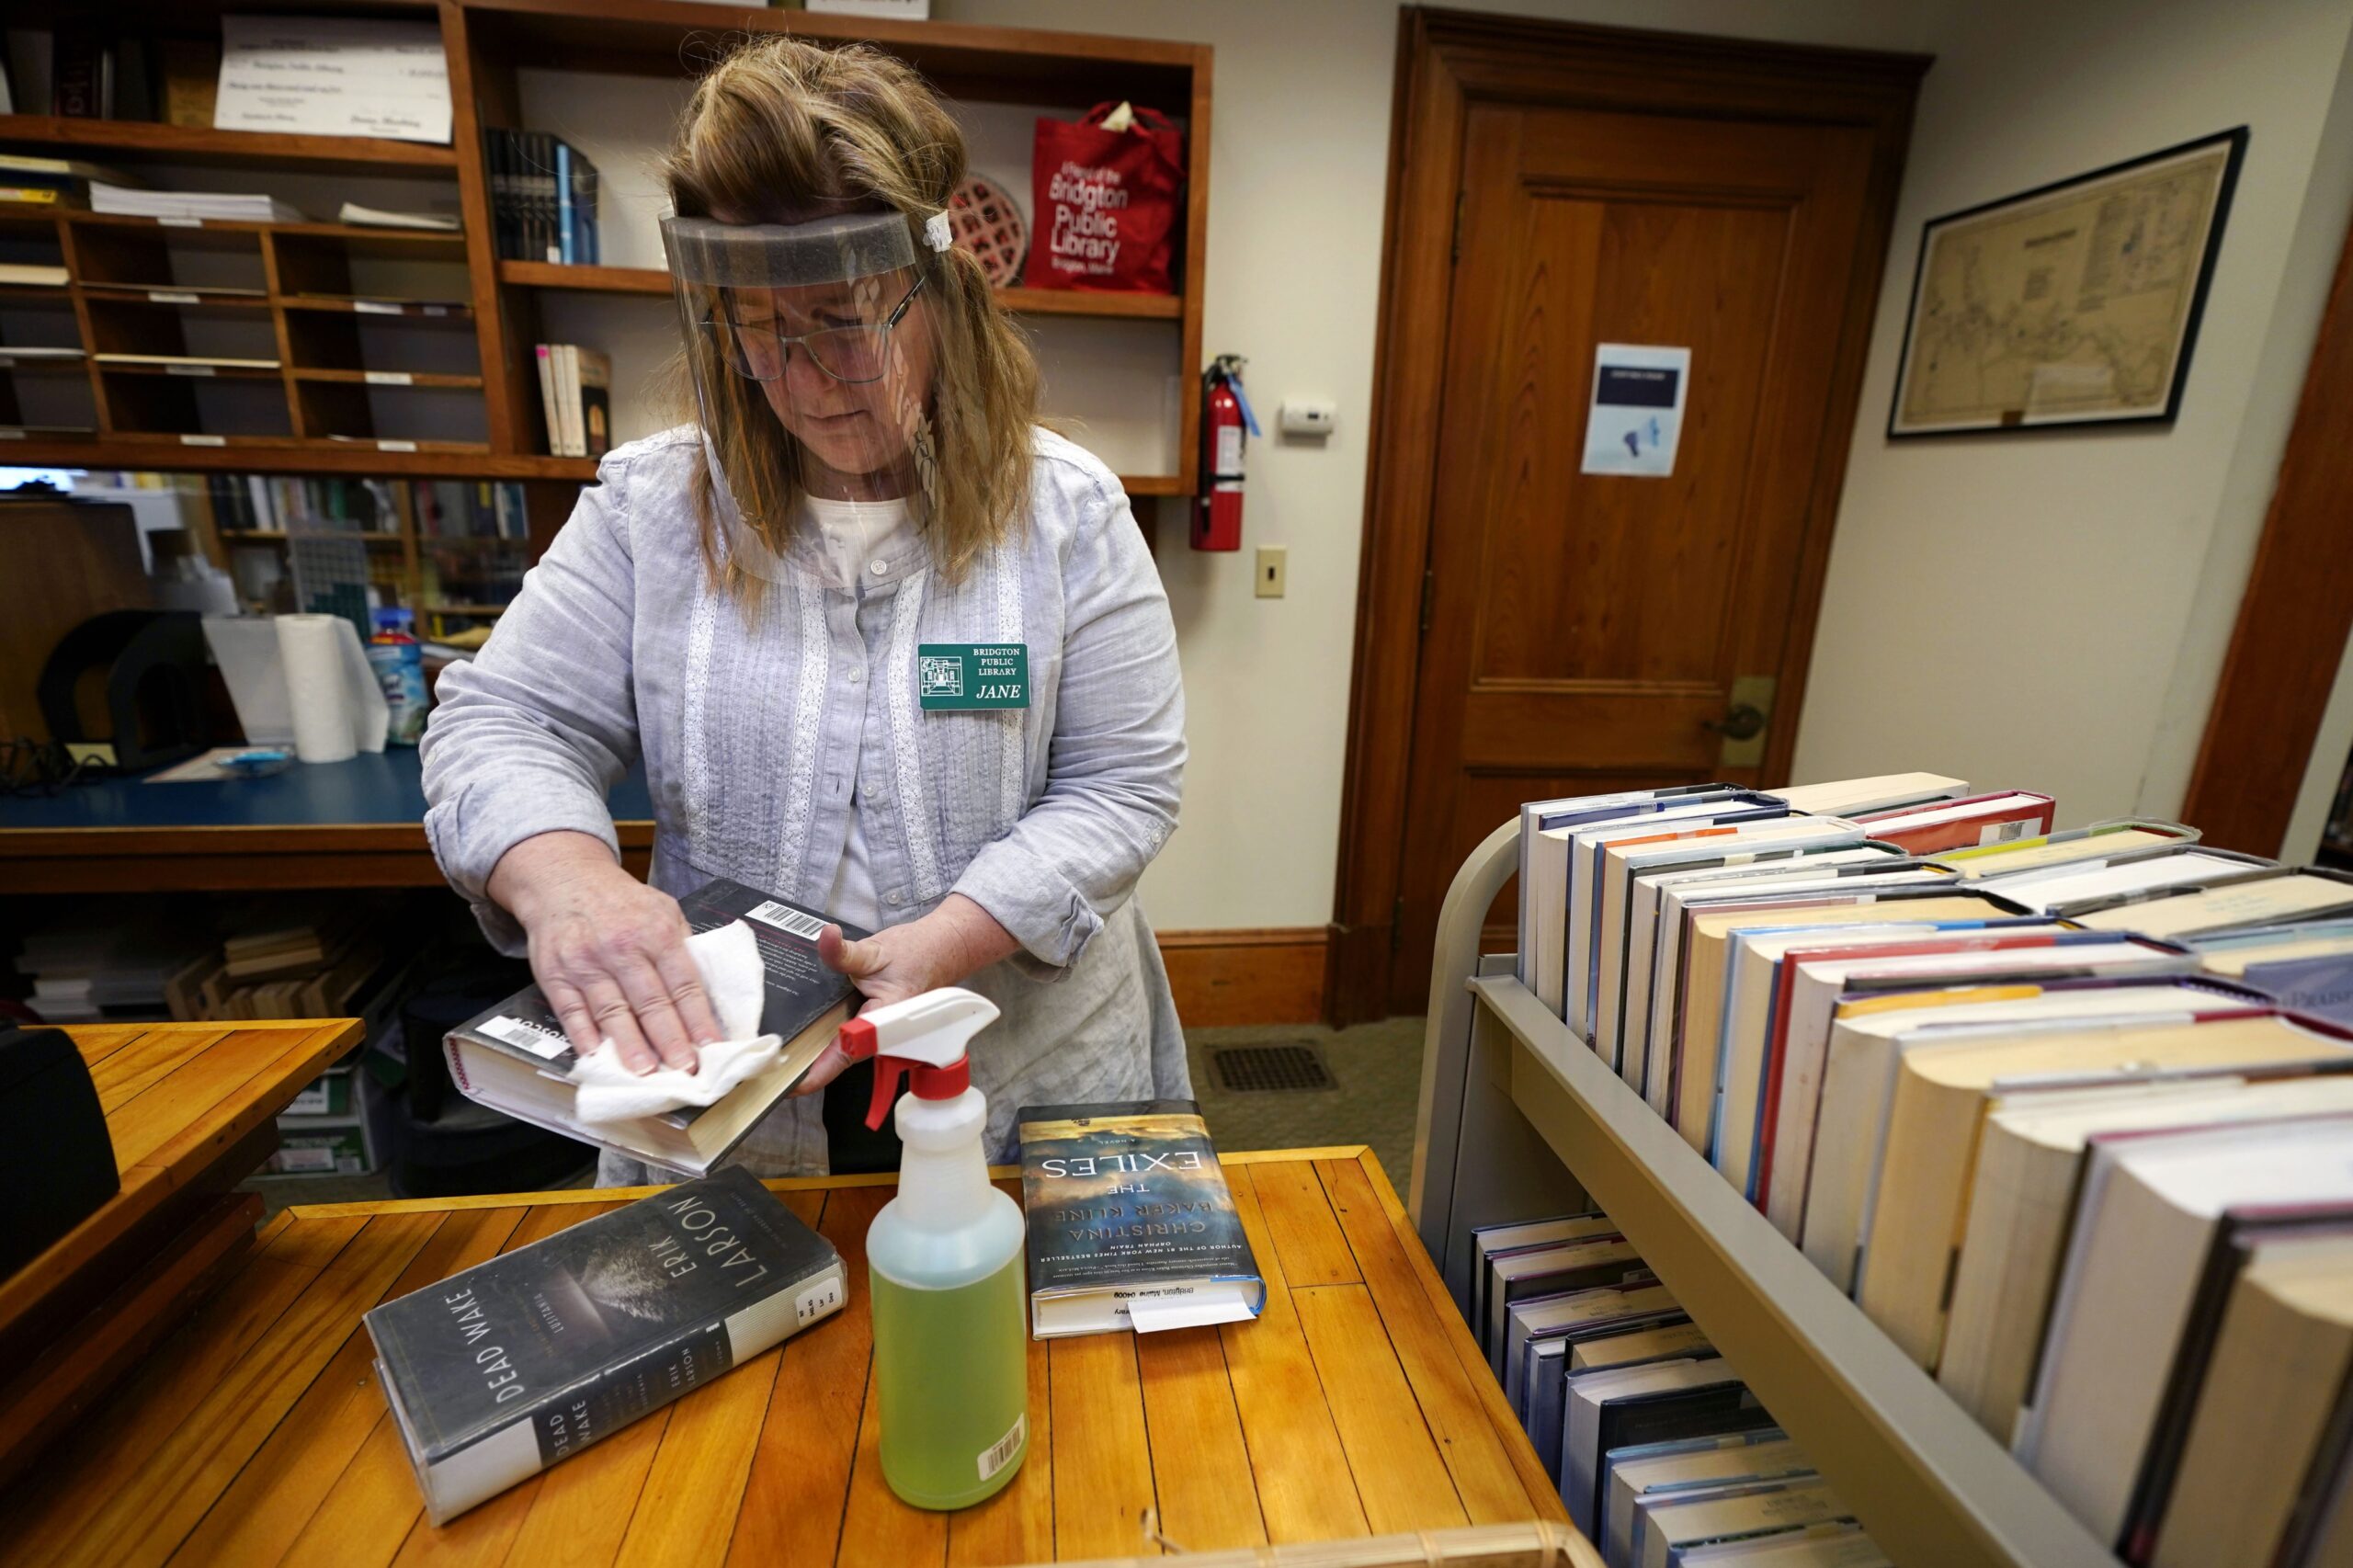 With In-Person Services Limited, Wisconsin’s Libraries Check Out New Ways To Reach Their Communities